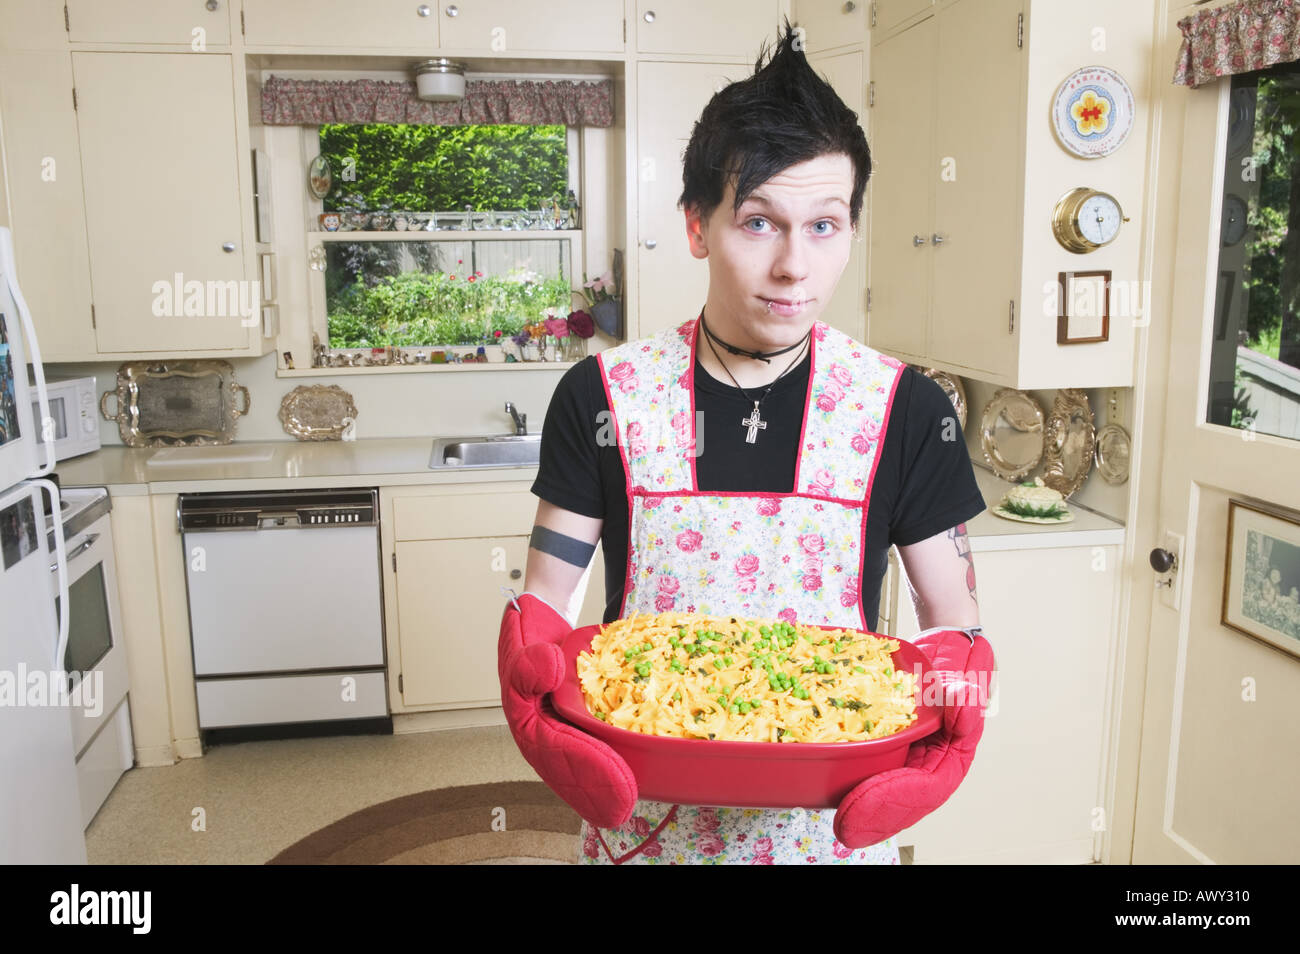 Man in kitchen holding a casserole Stock Photo